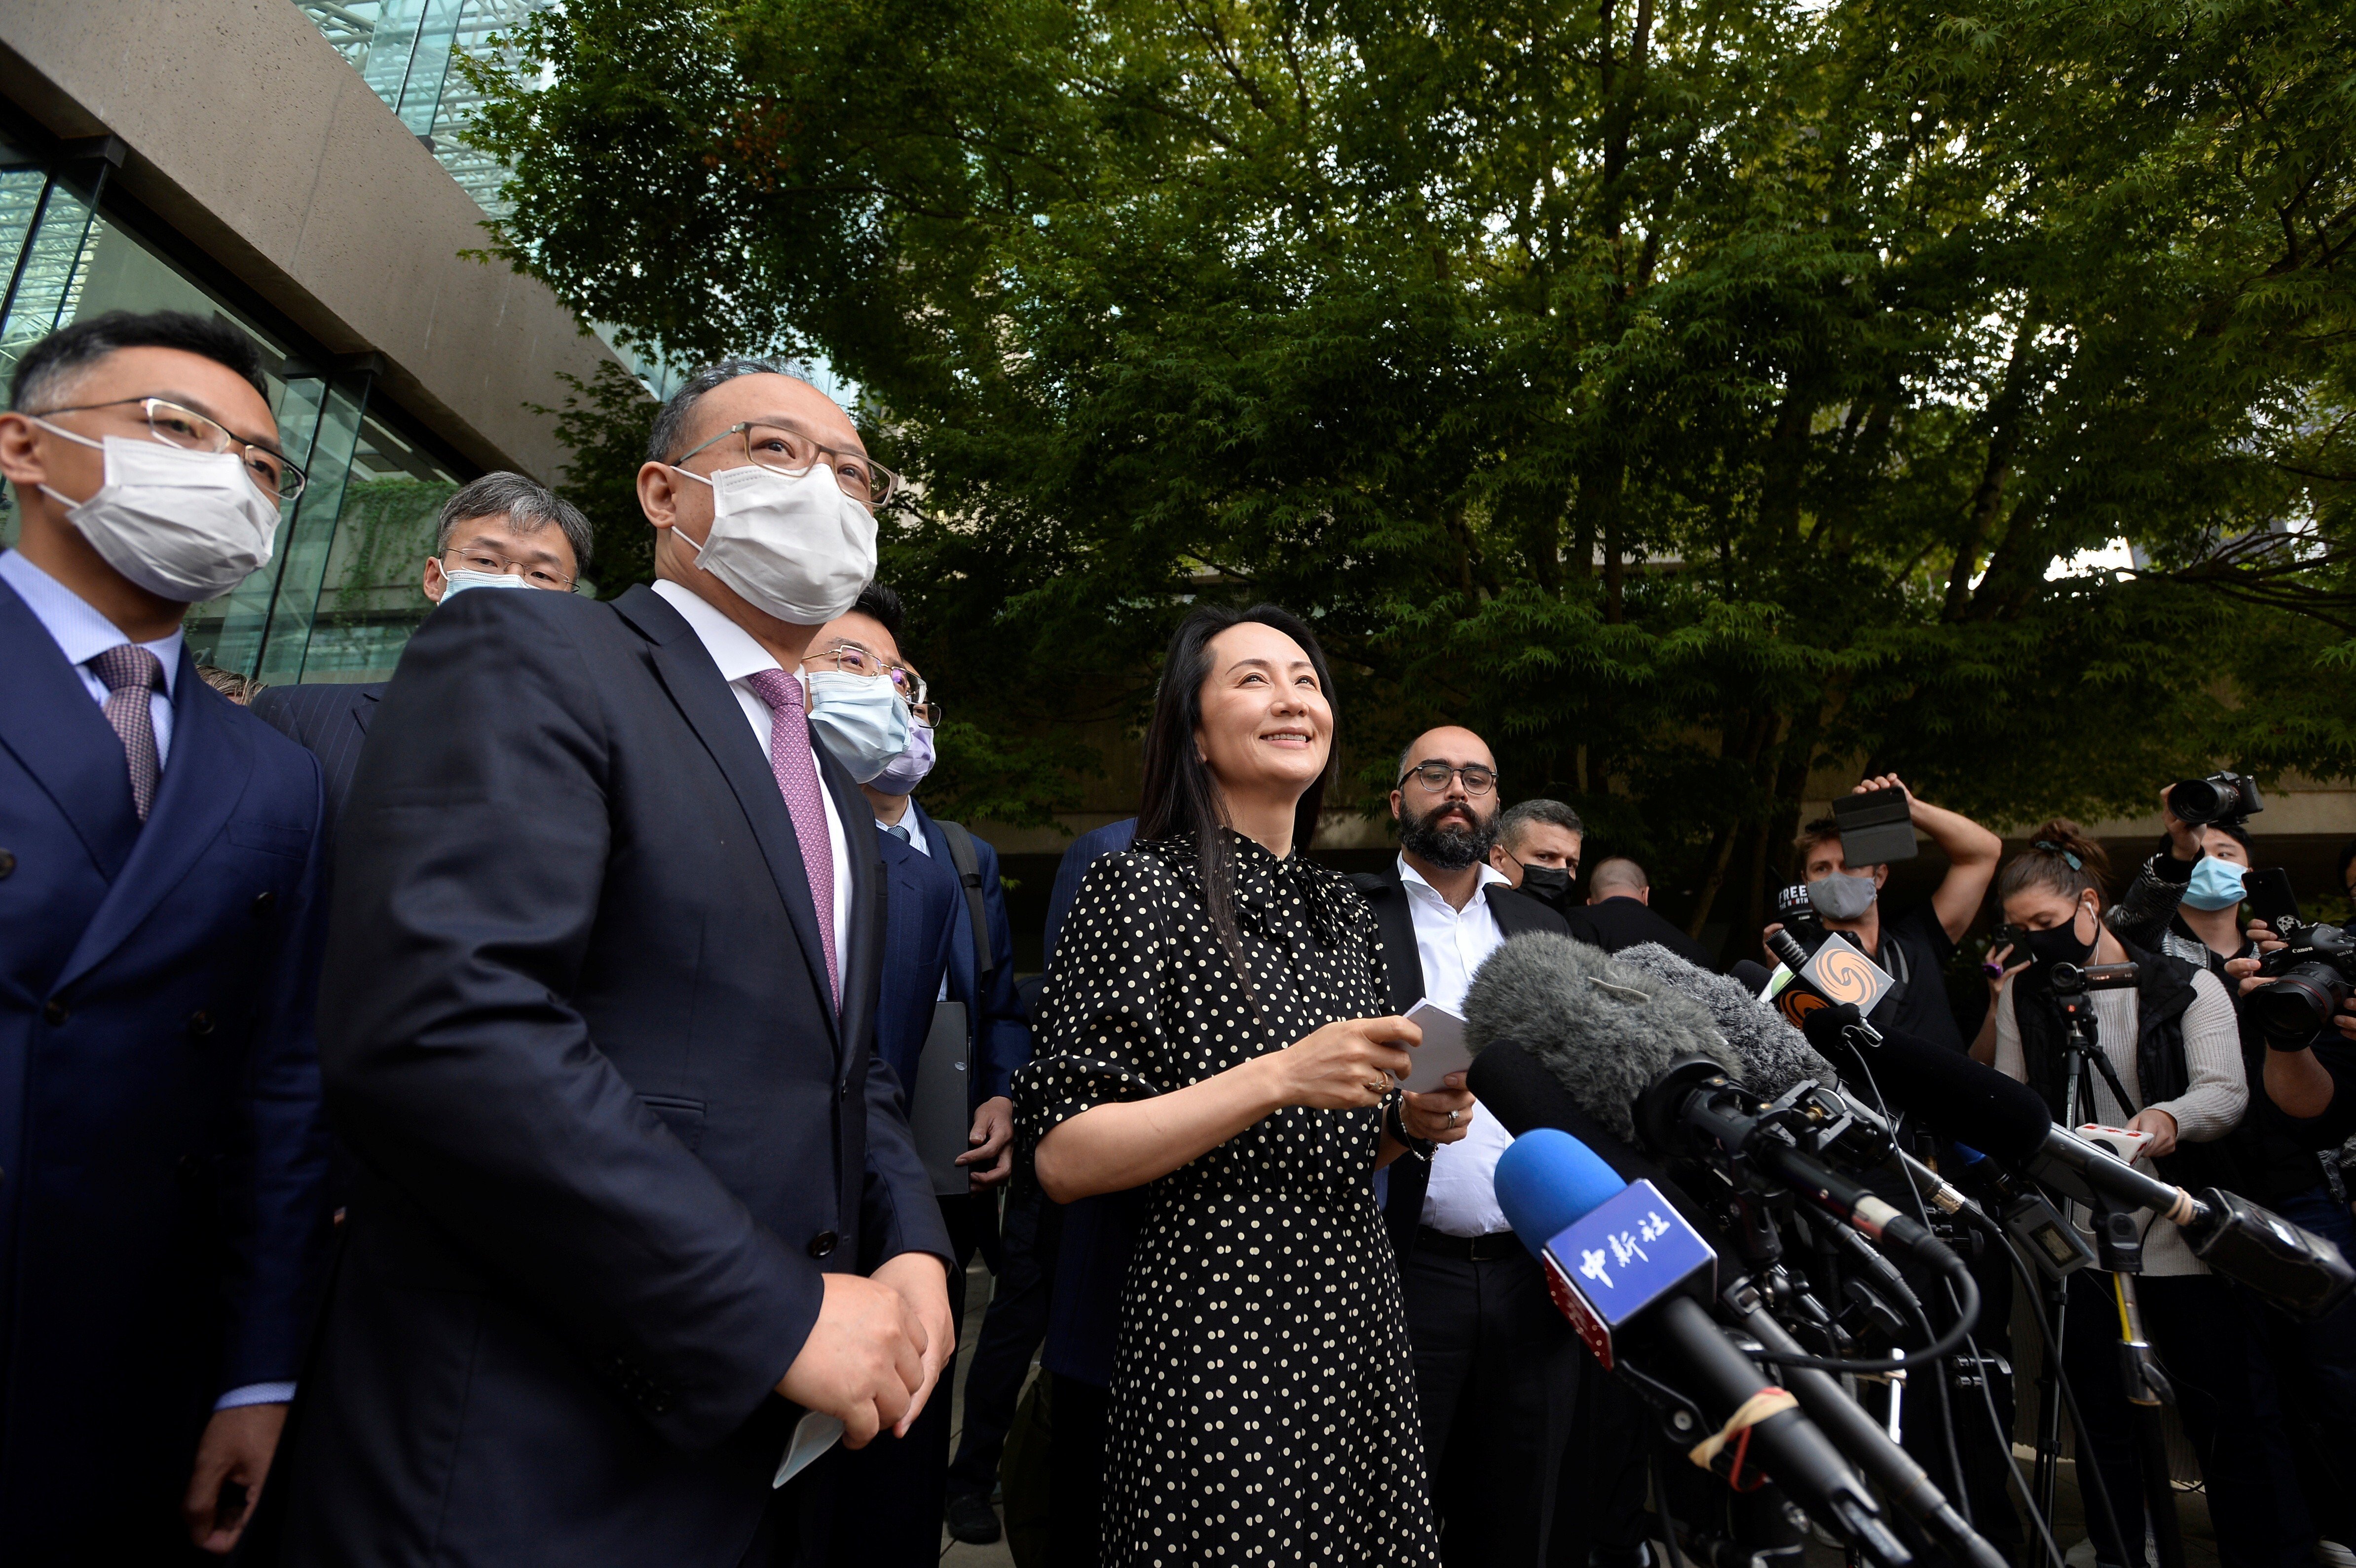 Huawei Technologies CFO Meng Wanzhou leaves court at the conclusion of a hearing in Vancouver, British Columbia, on September 24. Photo: Reuters